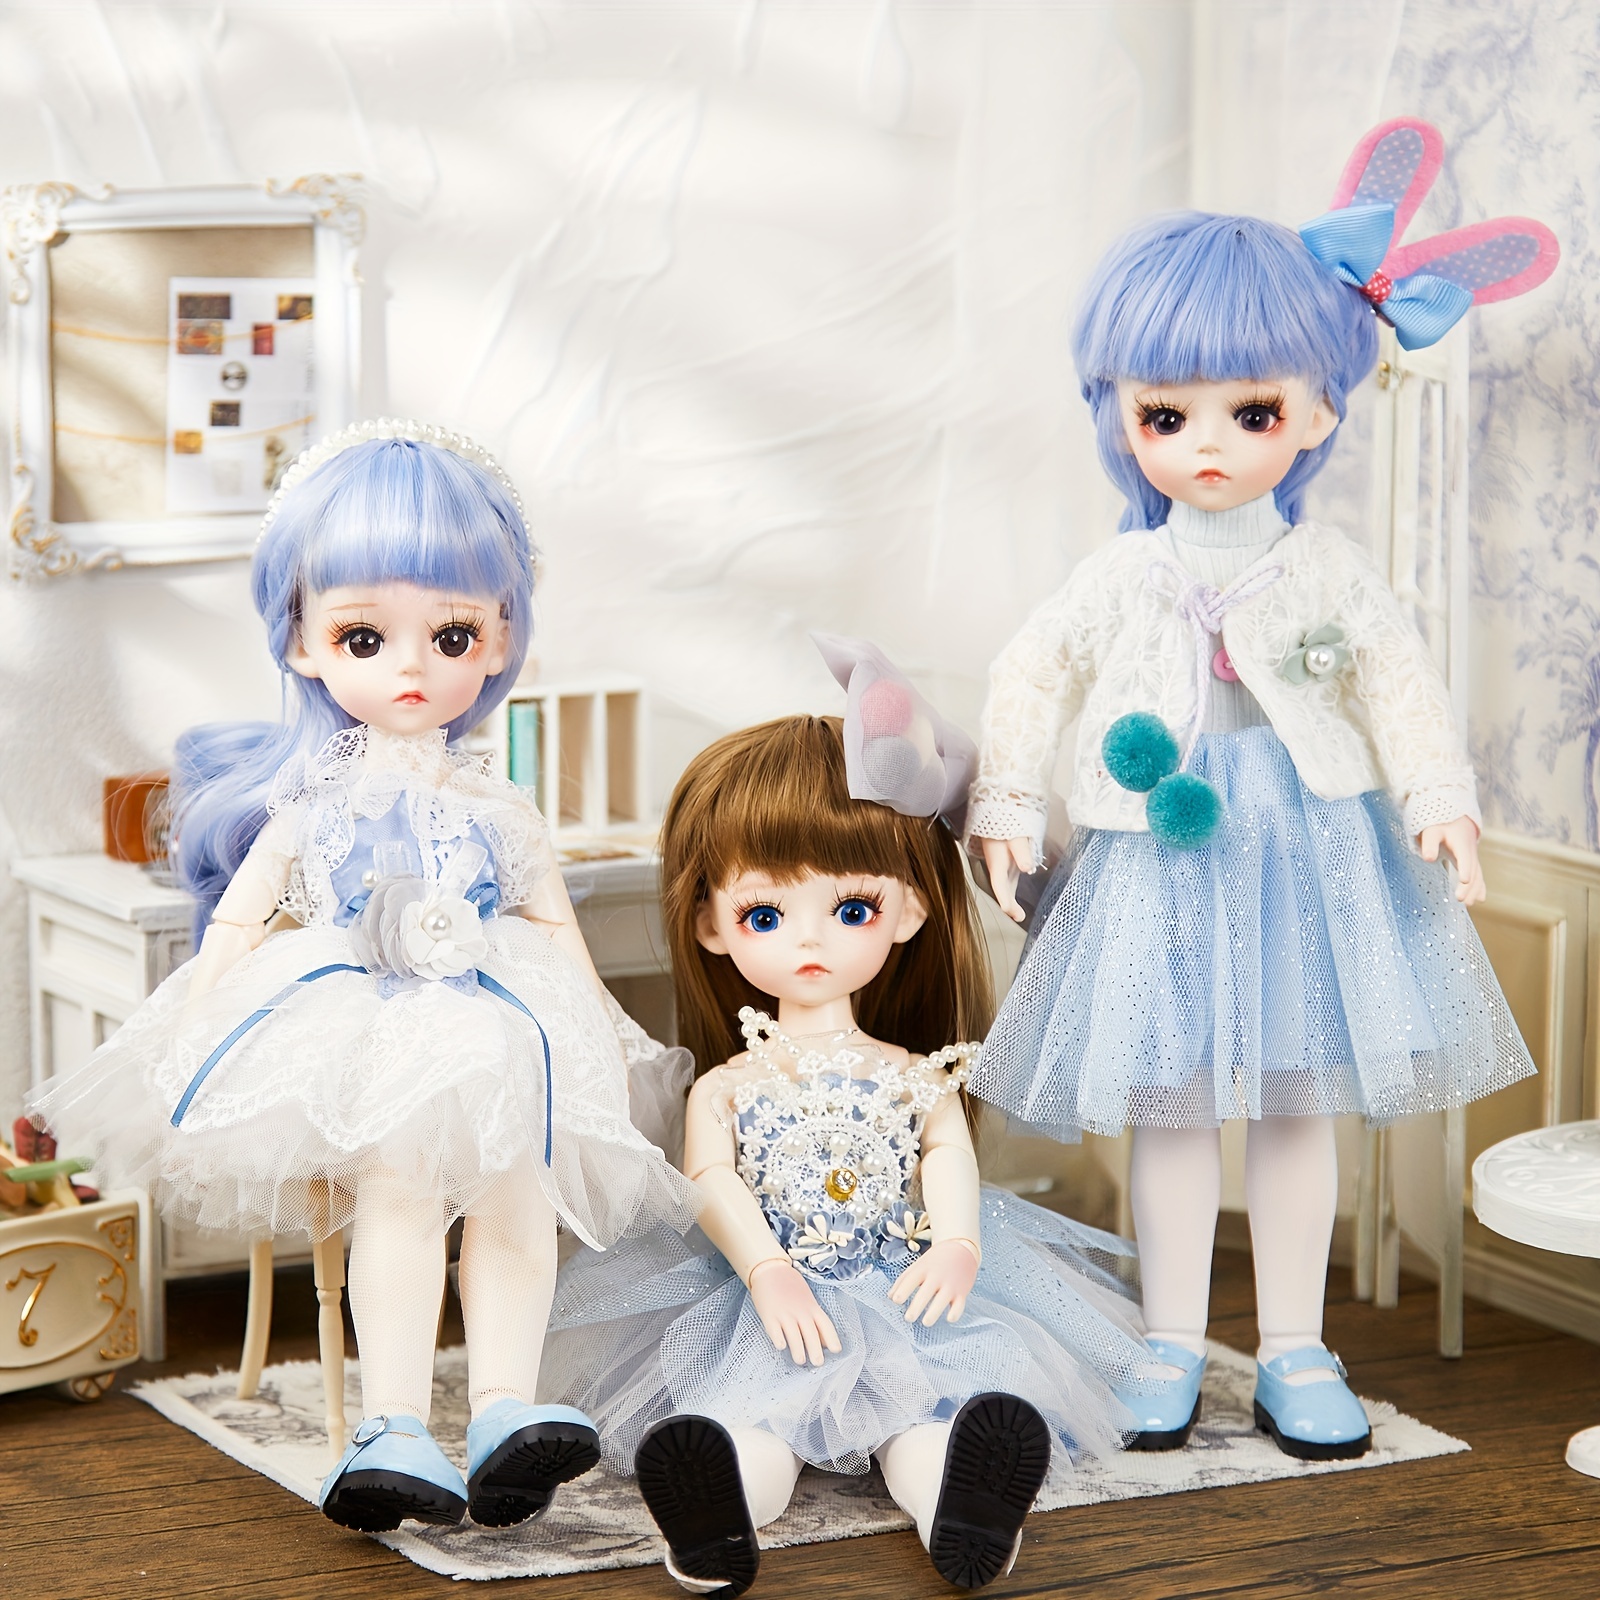 New 28cm Anime Doll Full Set 1/6 Bjd Doll with Clothes Suit and Headdress  Girls Dress Up Toy Gifts